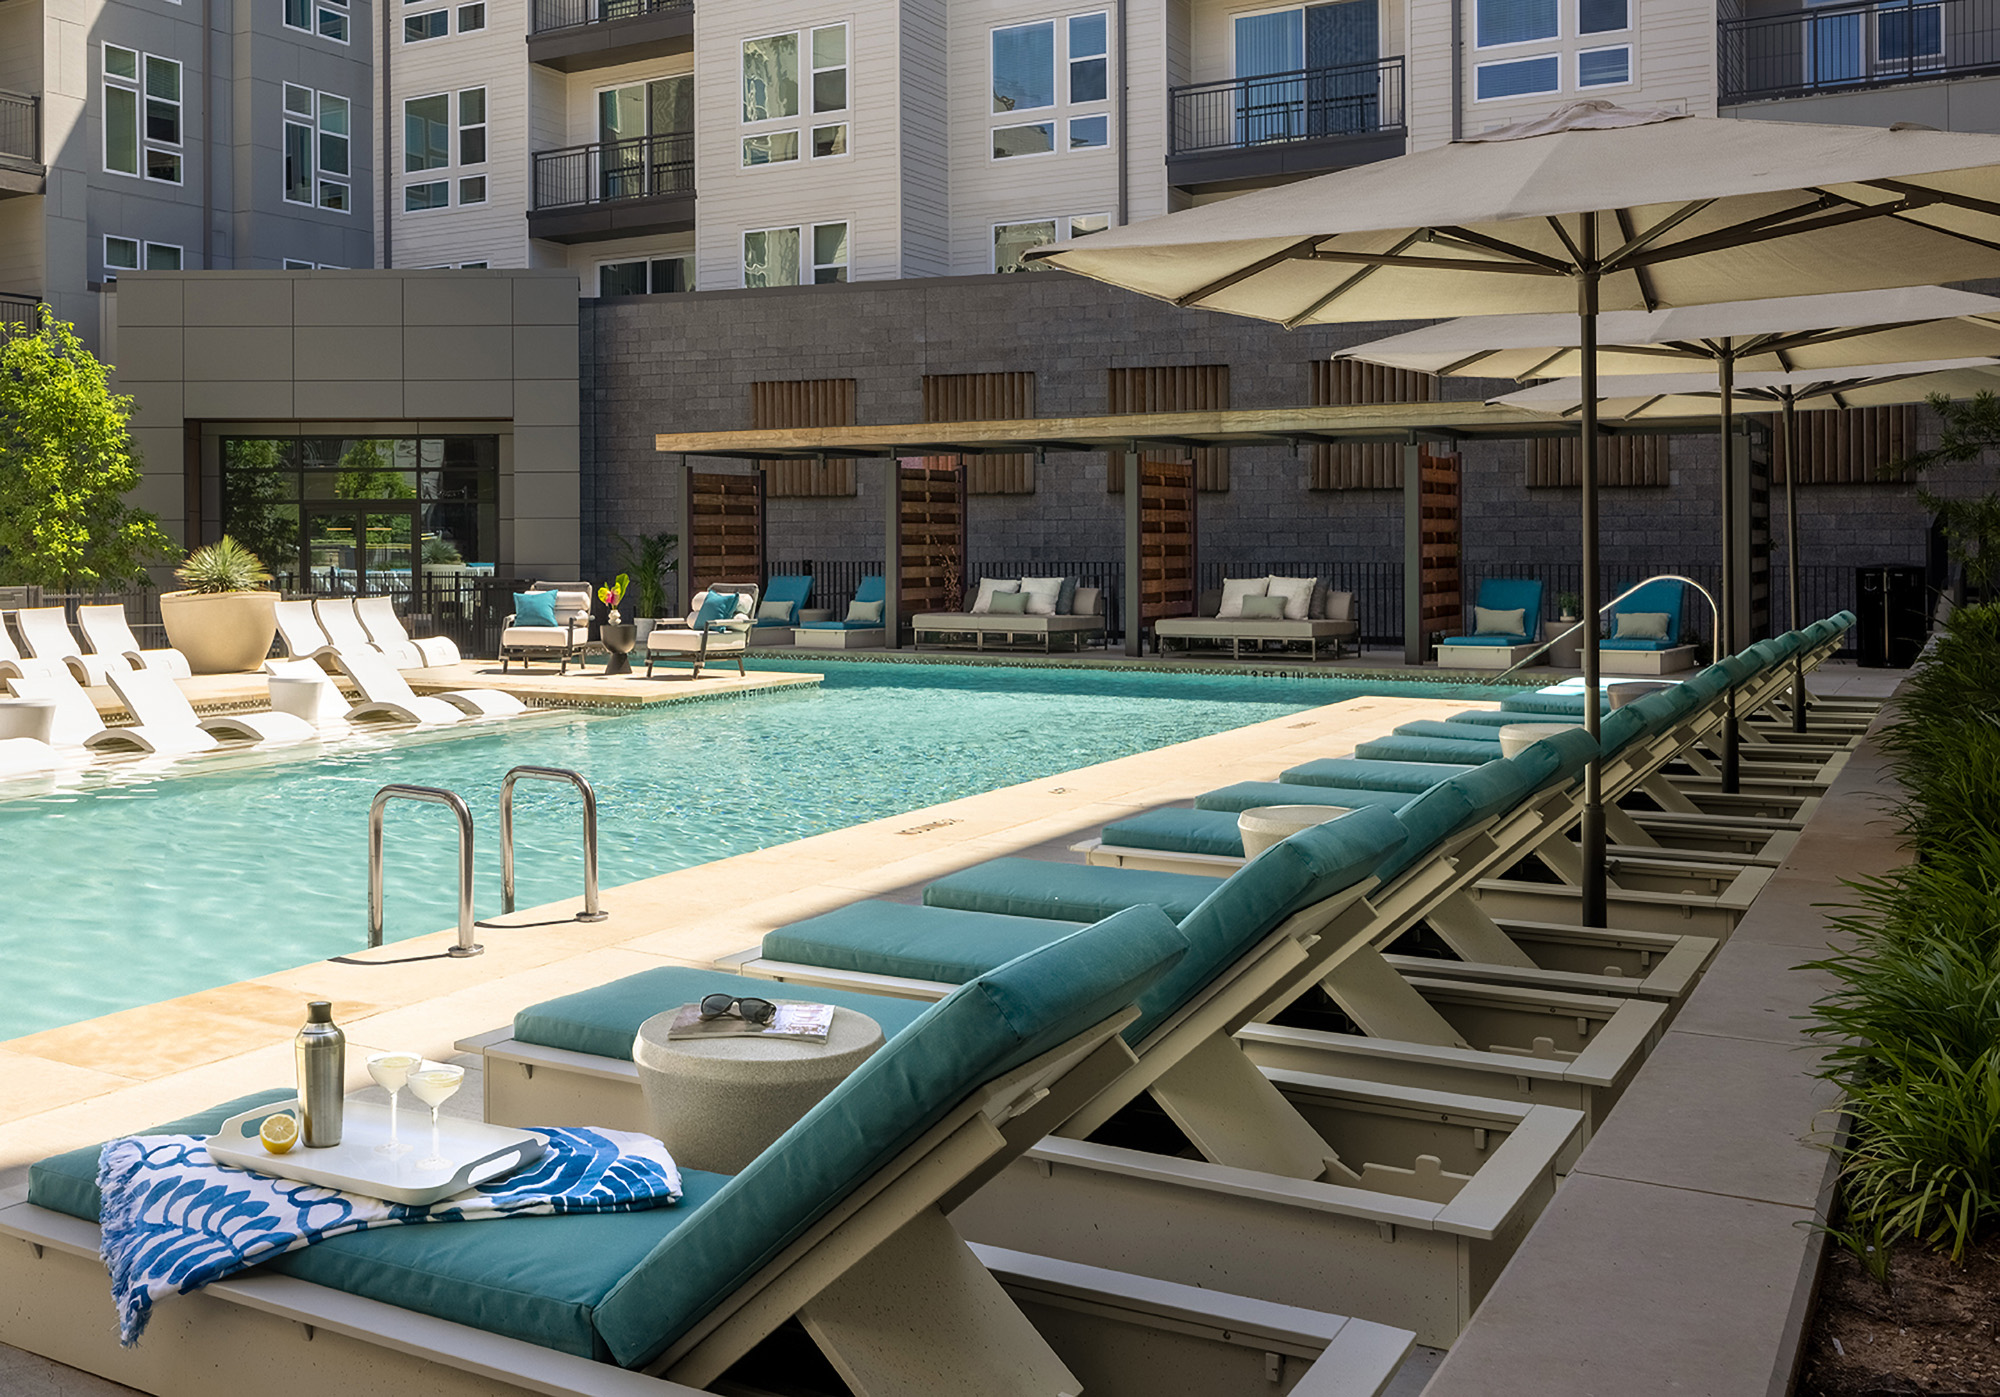 Alder at the Grove pool, a 276 unit multifamily complex with interior design by Britt Design Group